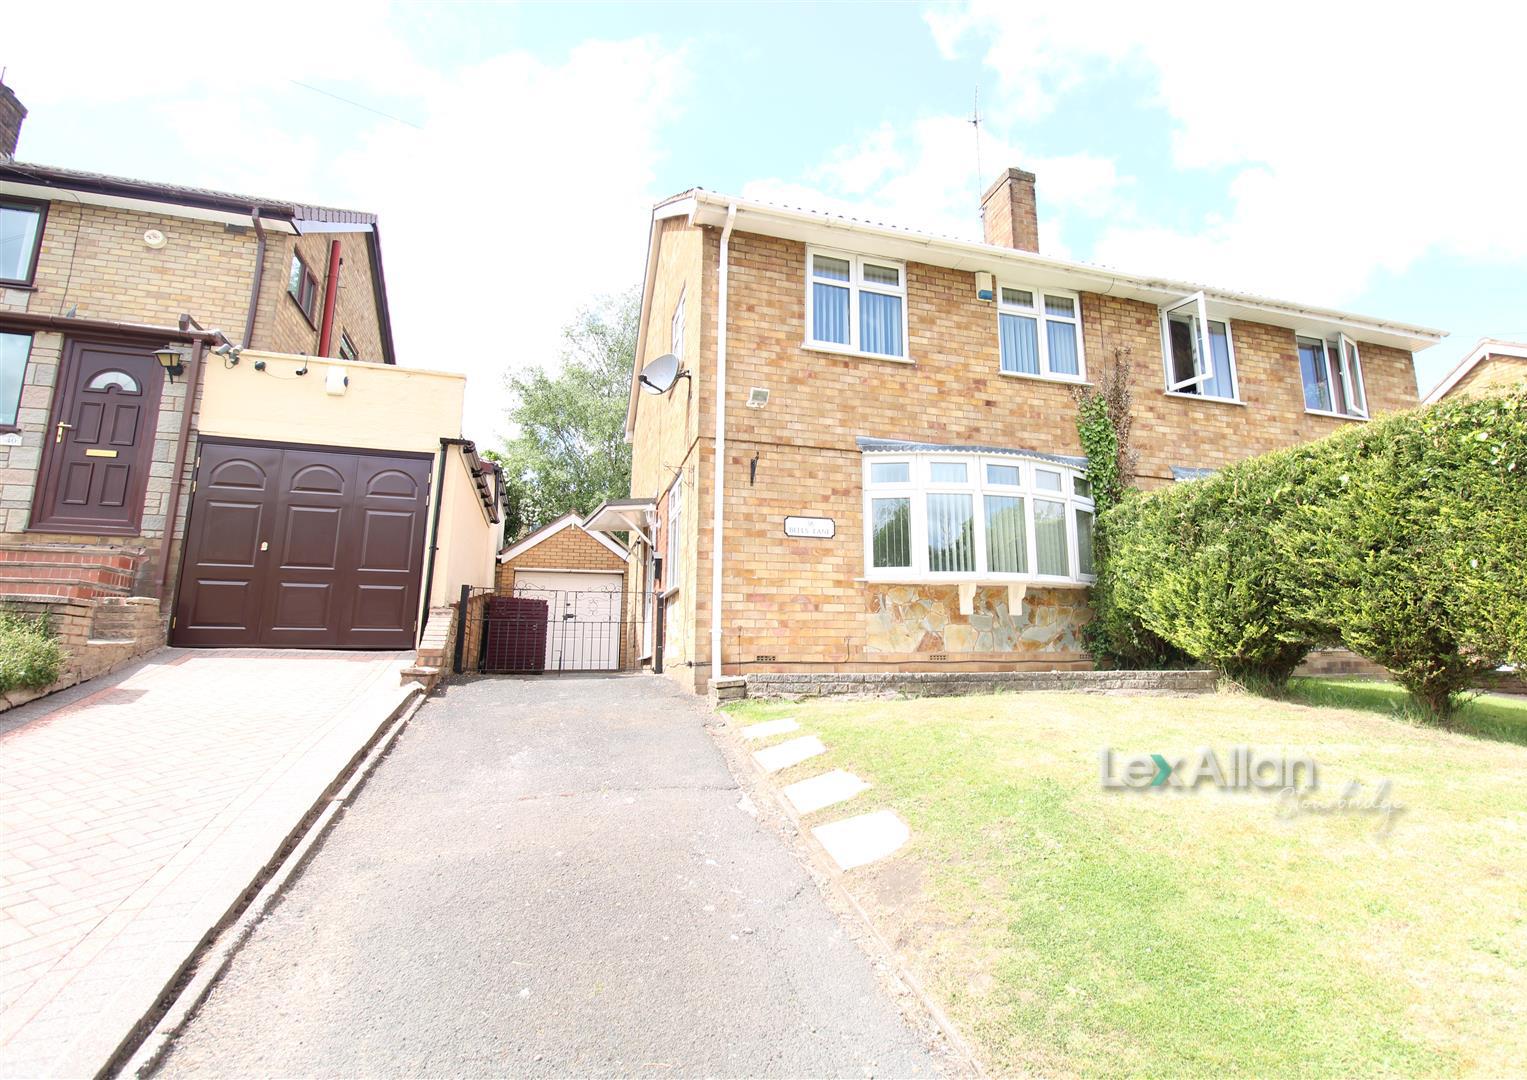 3 bed  for sale in Bells Lane, Stourbridge, DY8 